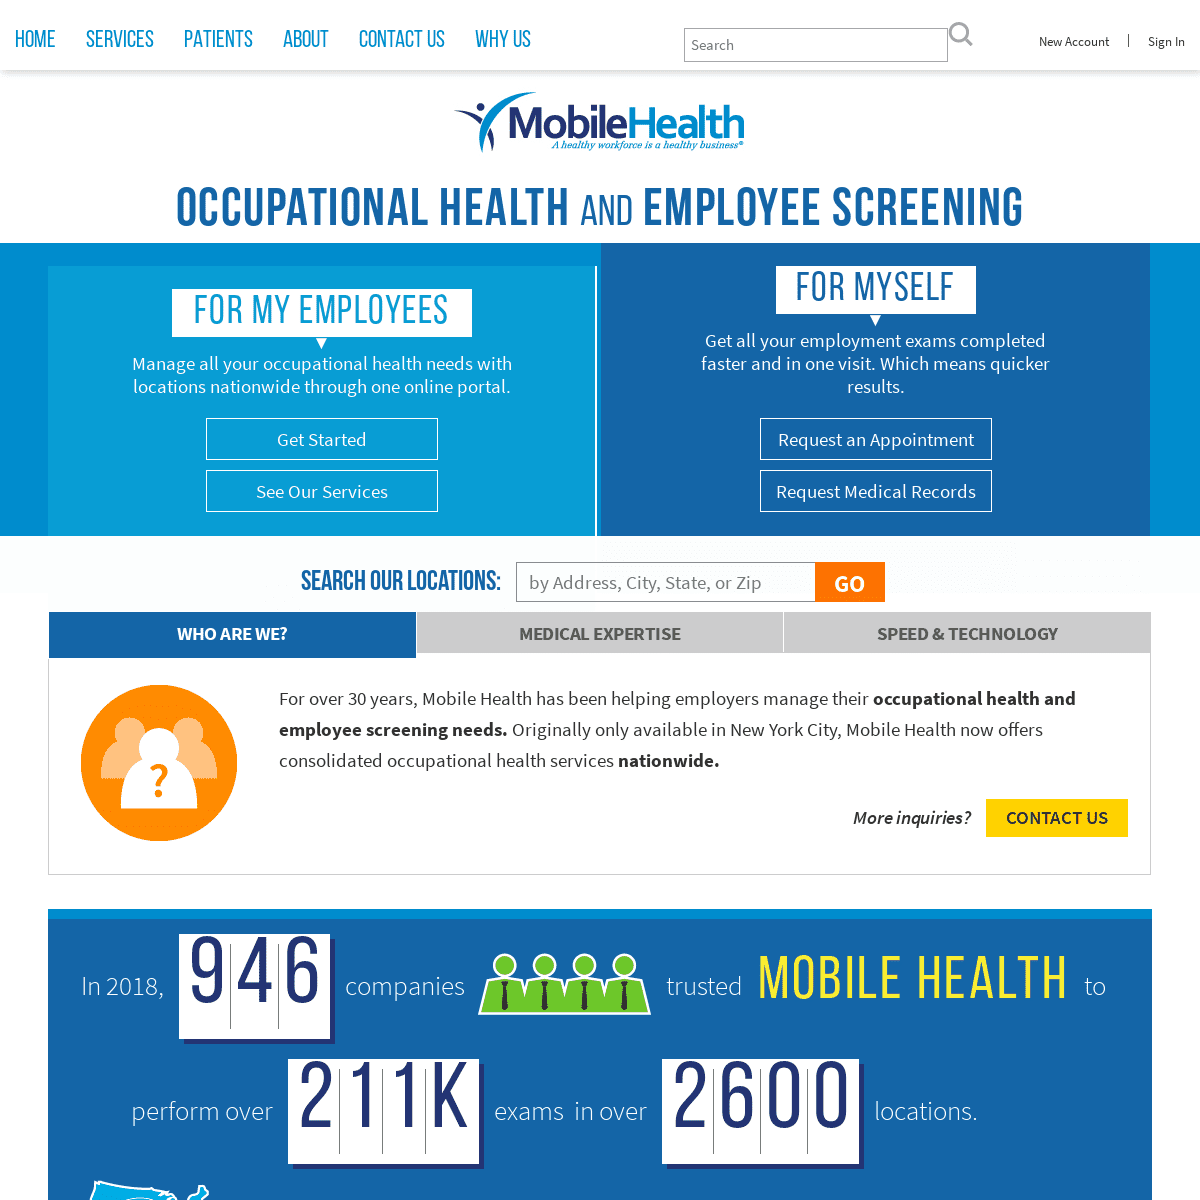 Employee Screening and Occupational Health - Nationwide Locations